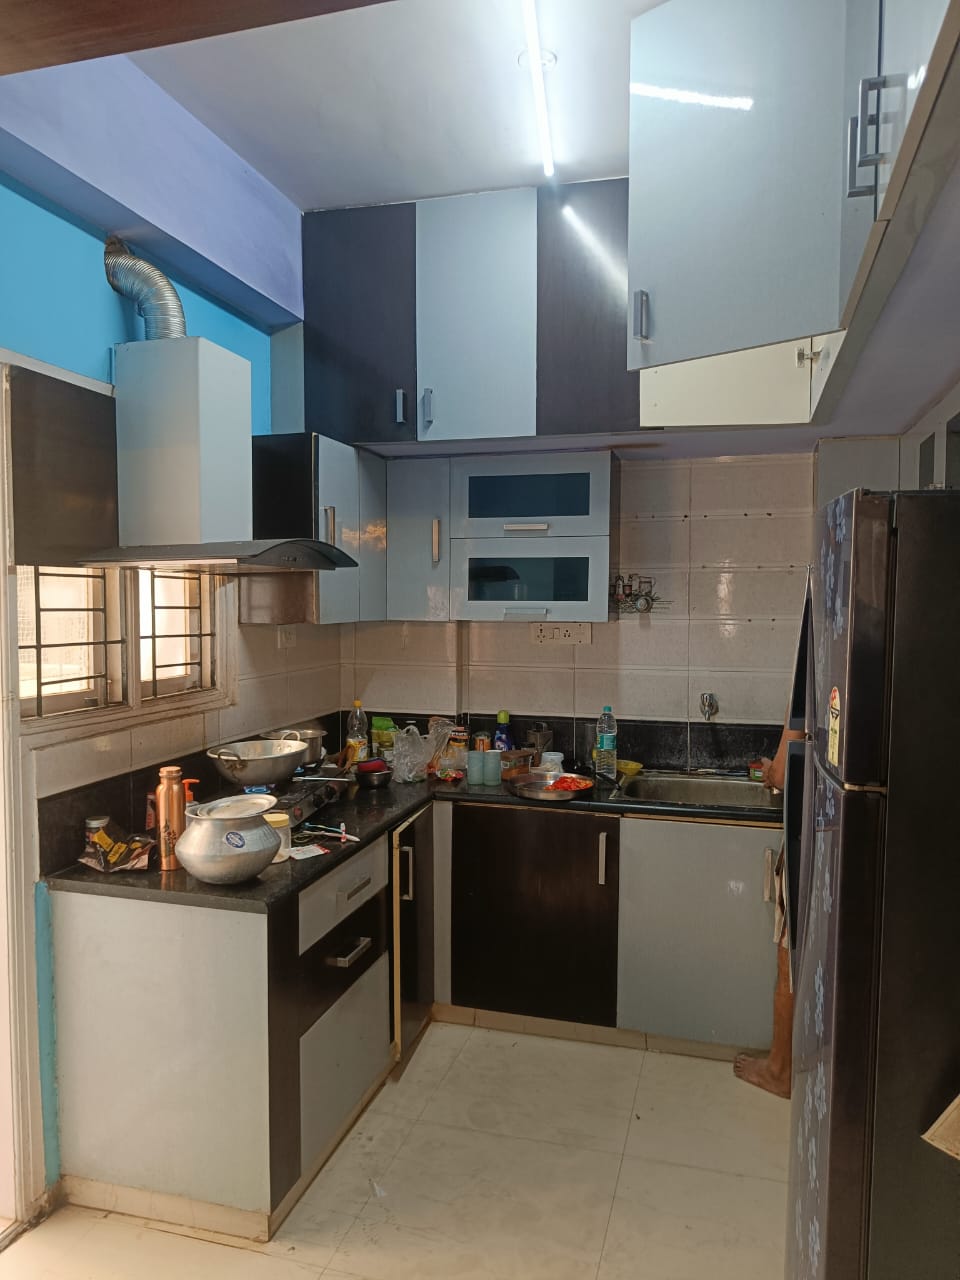 3 BHK Independent House for Lease Only at JAML2 - 2243 in Chickpet